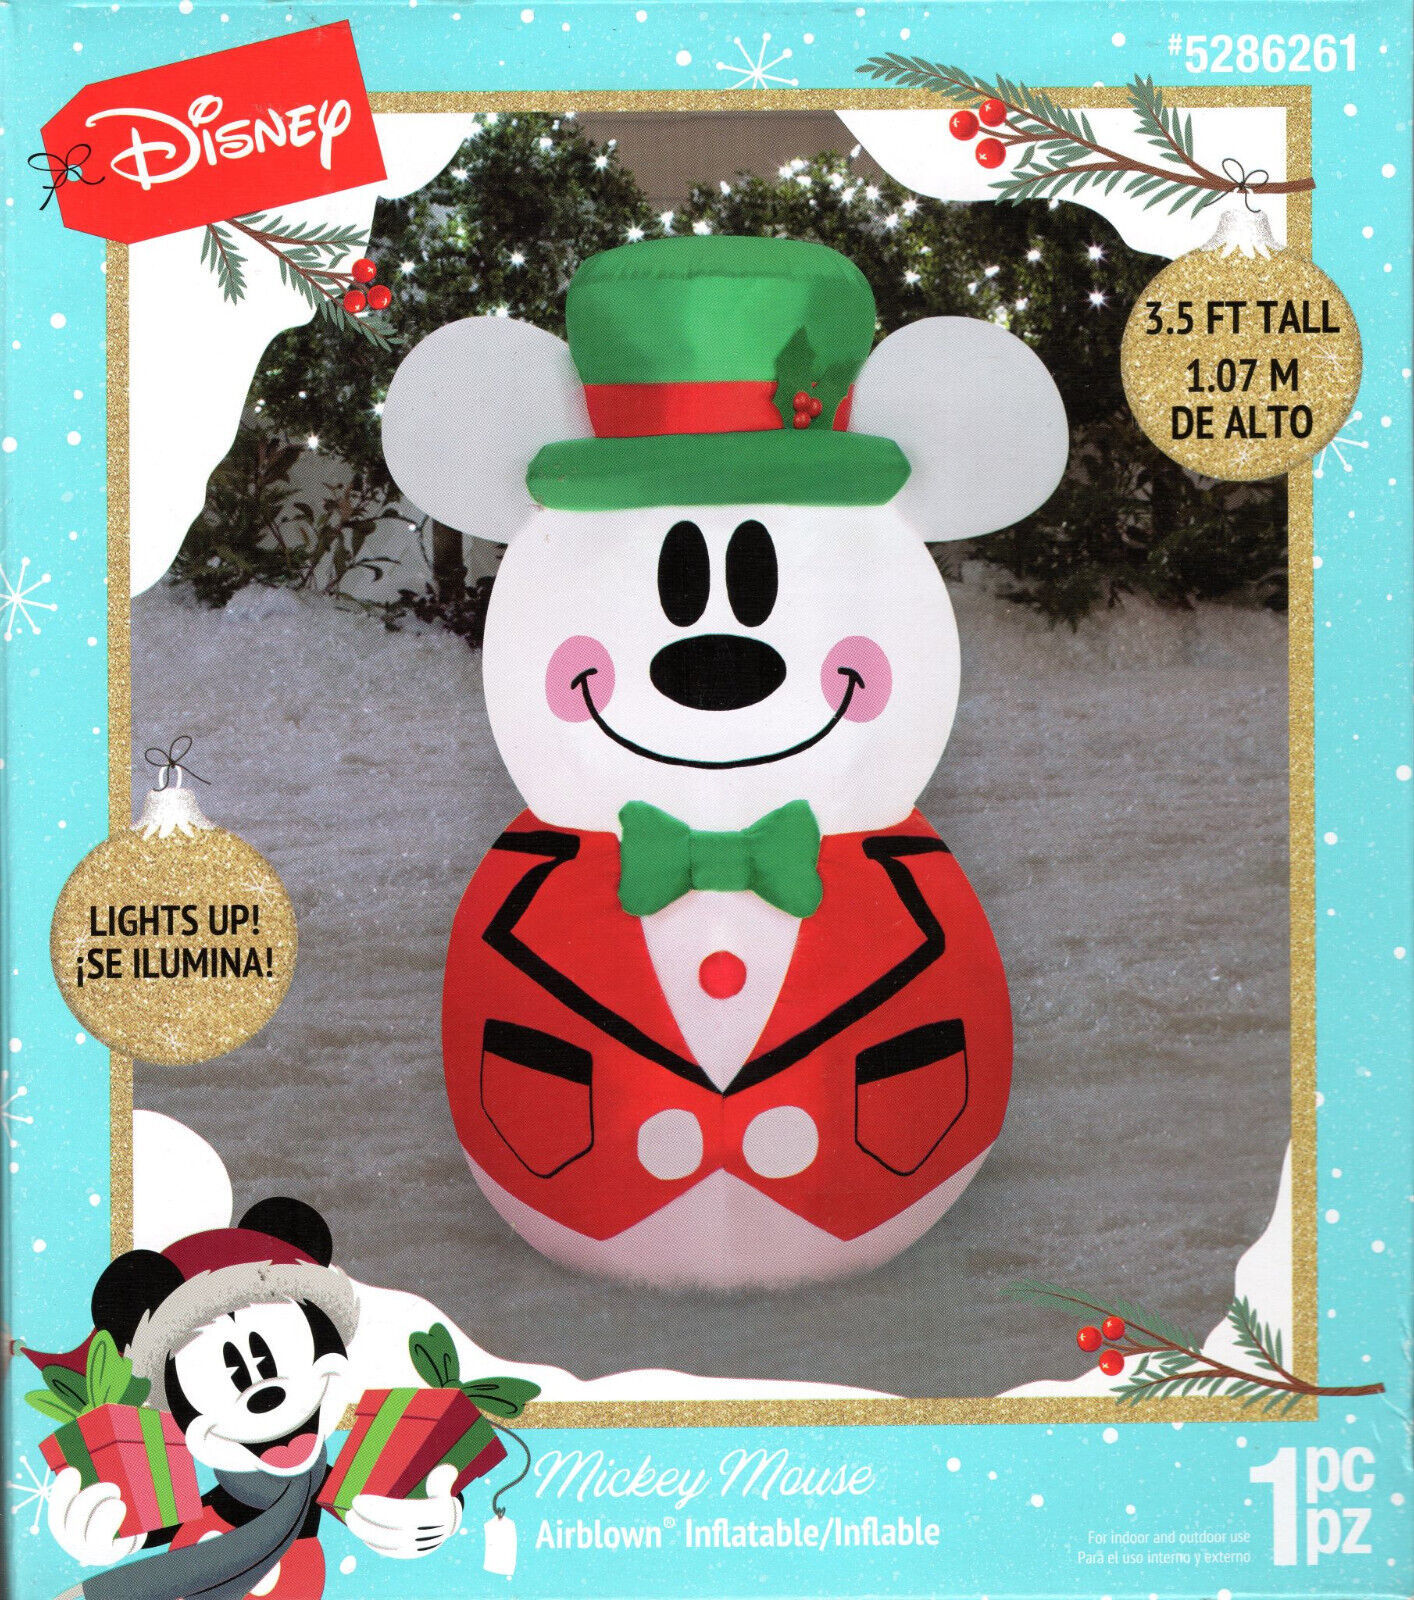 Primary image for DISNEY 5286261 GEMMY 882013 MICKEY MOUSE CHRISTMAS INFLATABLE 3.5' - NEW!